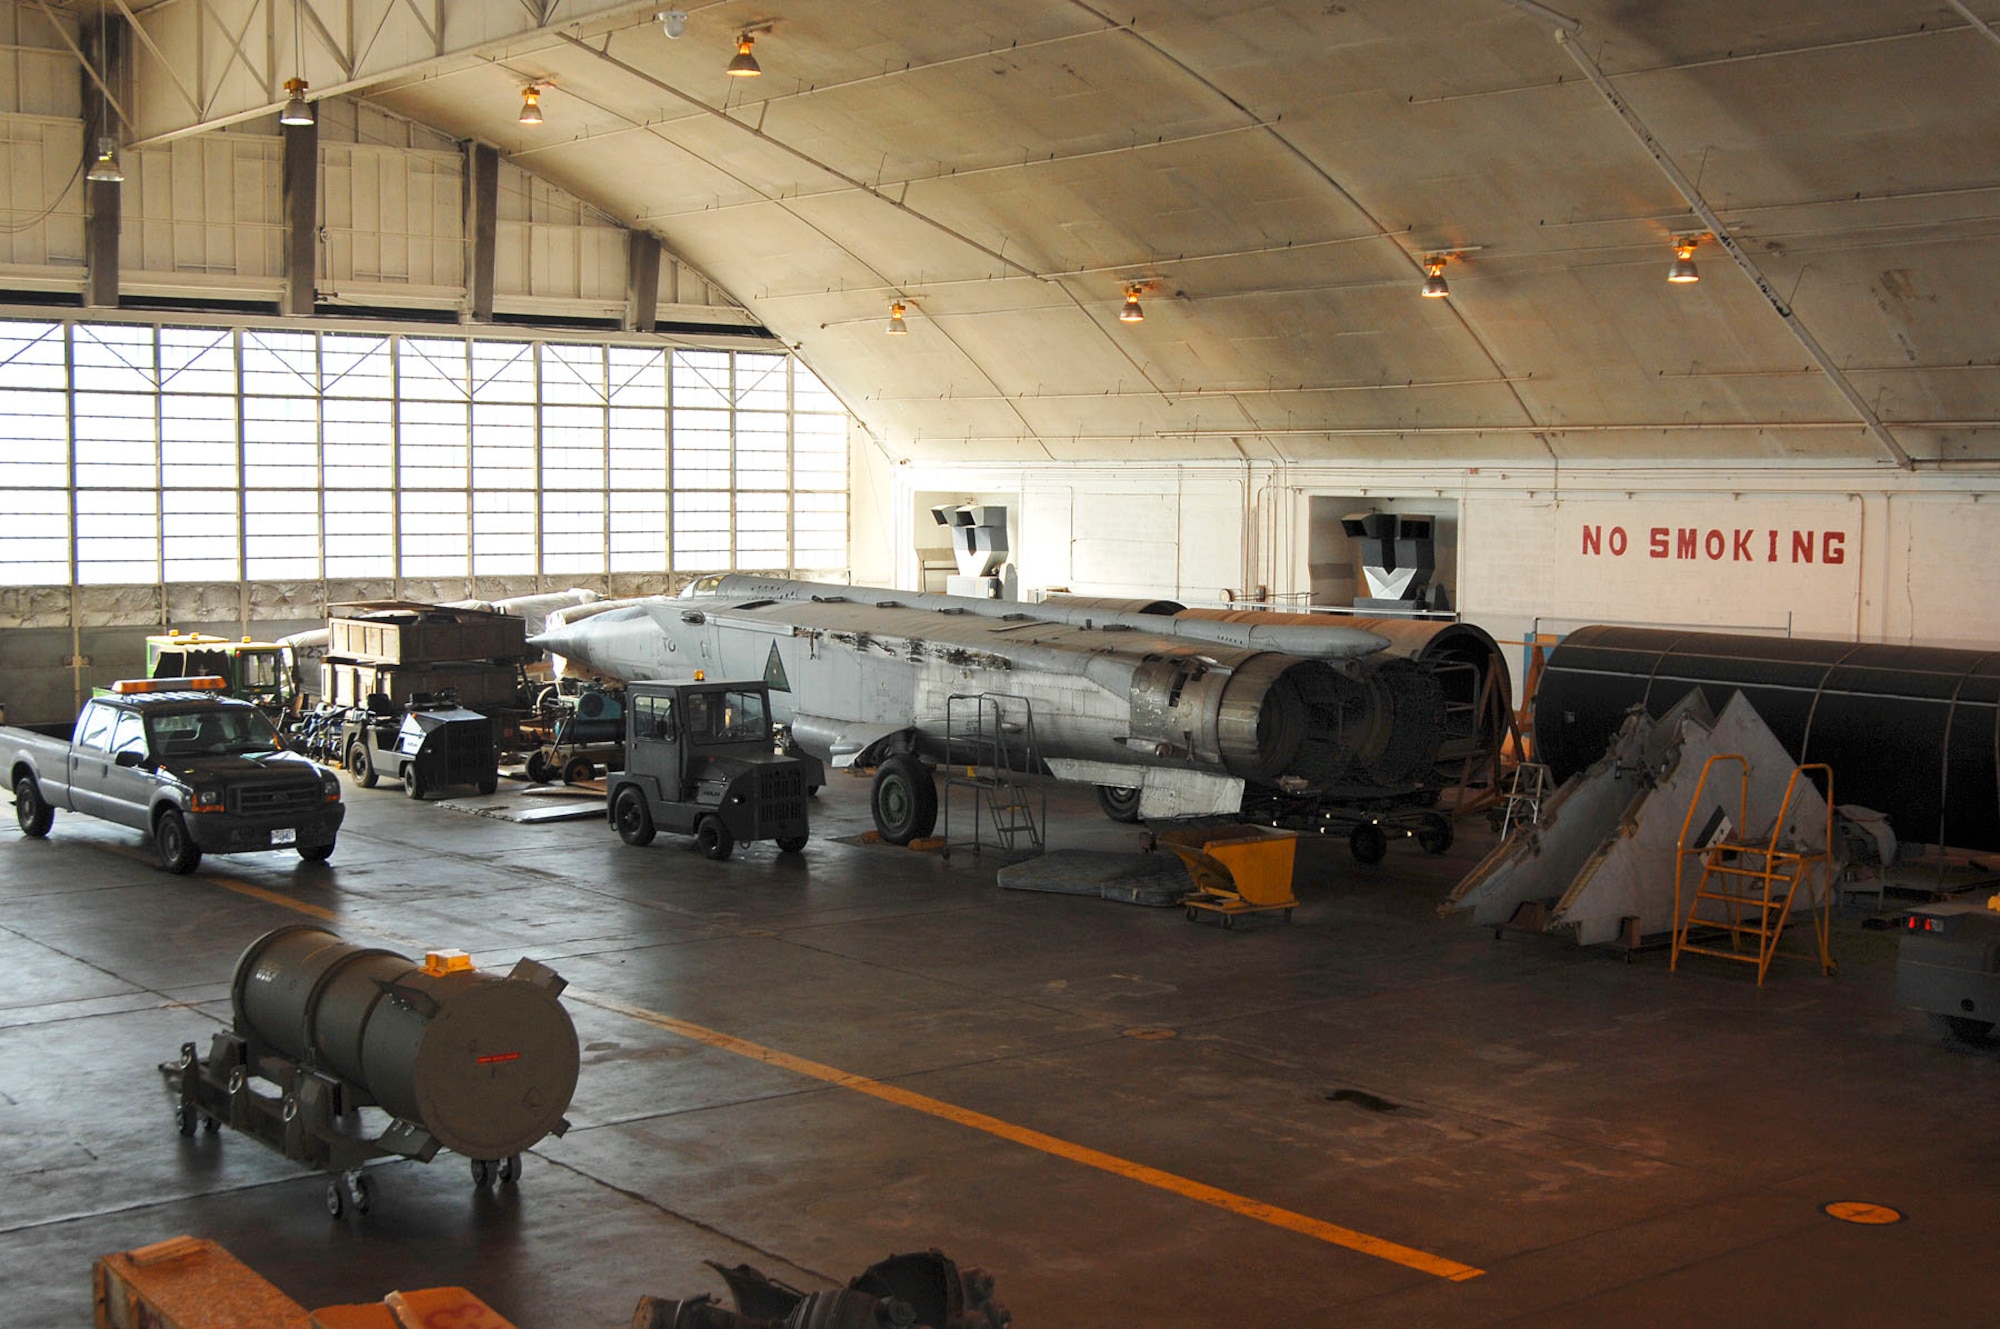 DAYTON, Ohio (02/2007) -- MiG 25 in the restoration area at the National Museum of the U.S. Air Force. (U.S. Air Force photo by Ben Strasser)